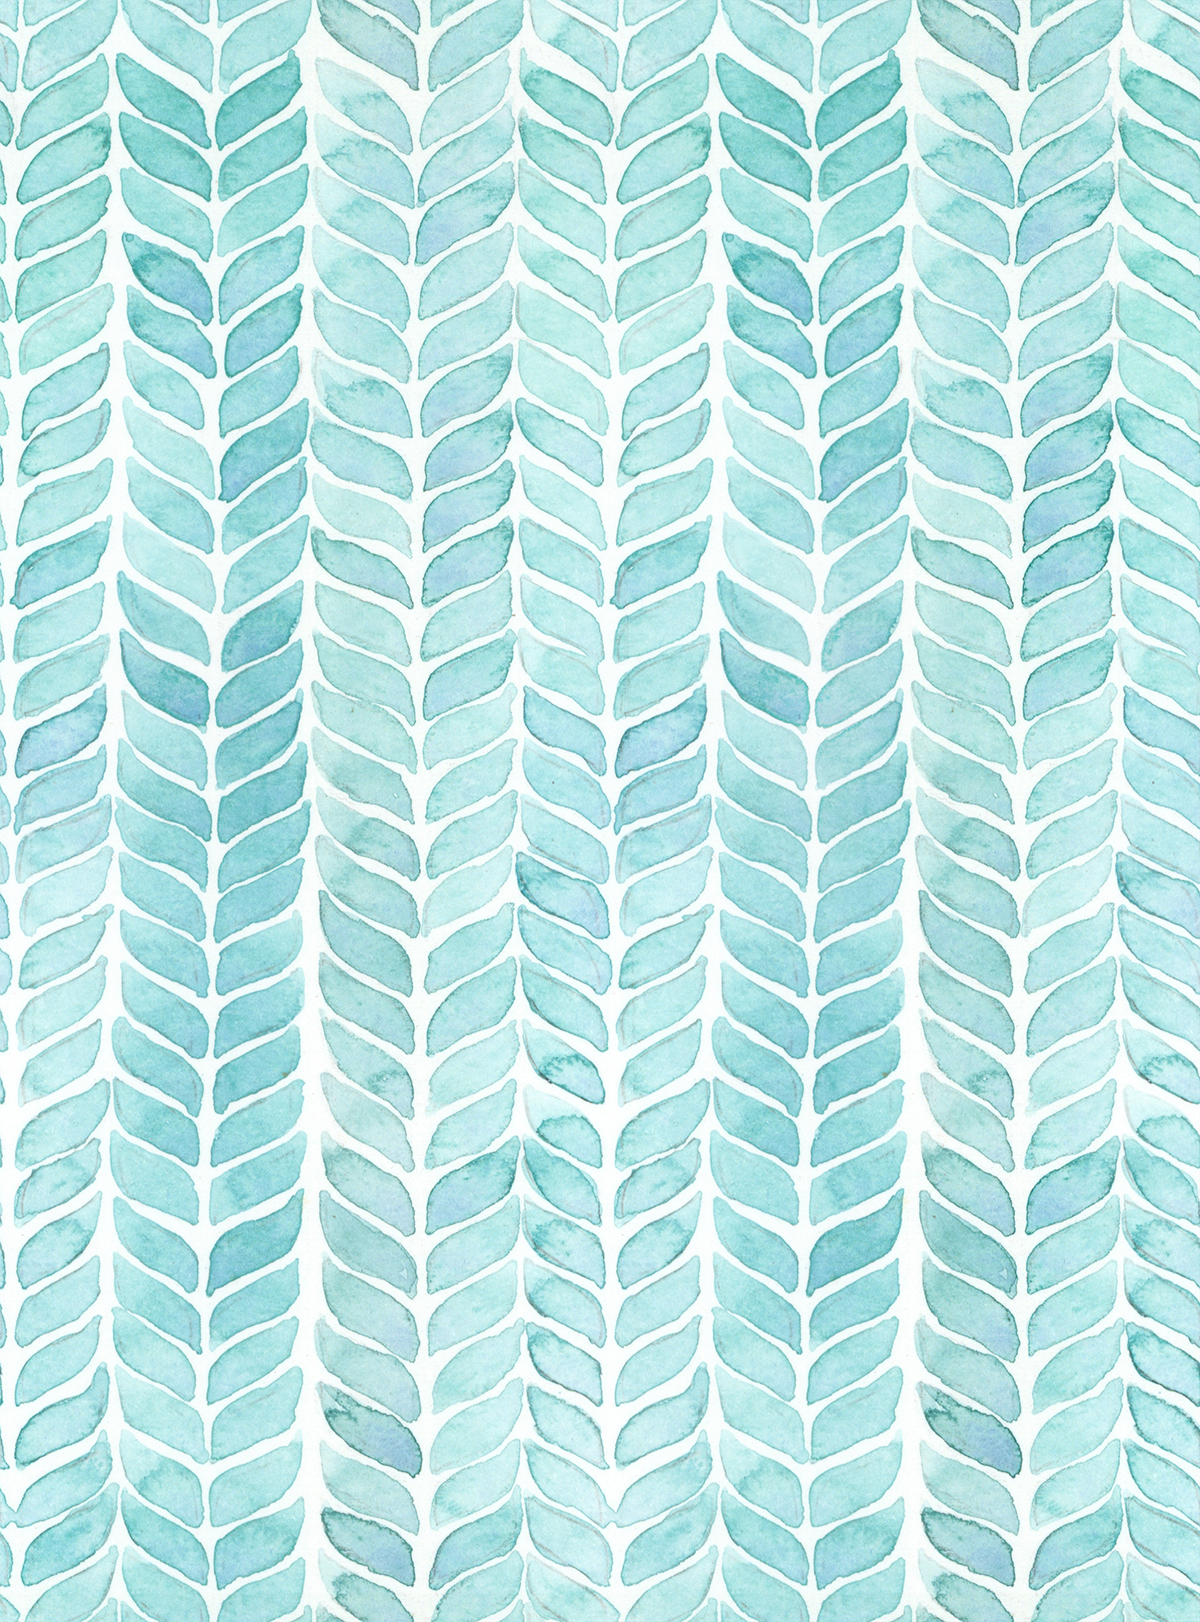 A watercolor pattern of blue and white leaves